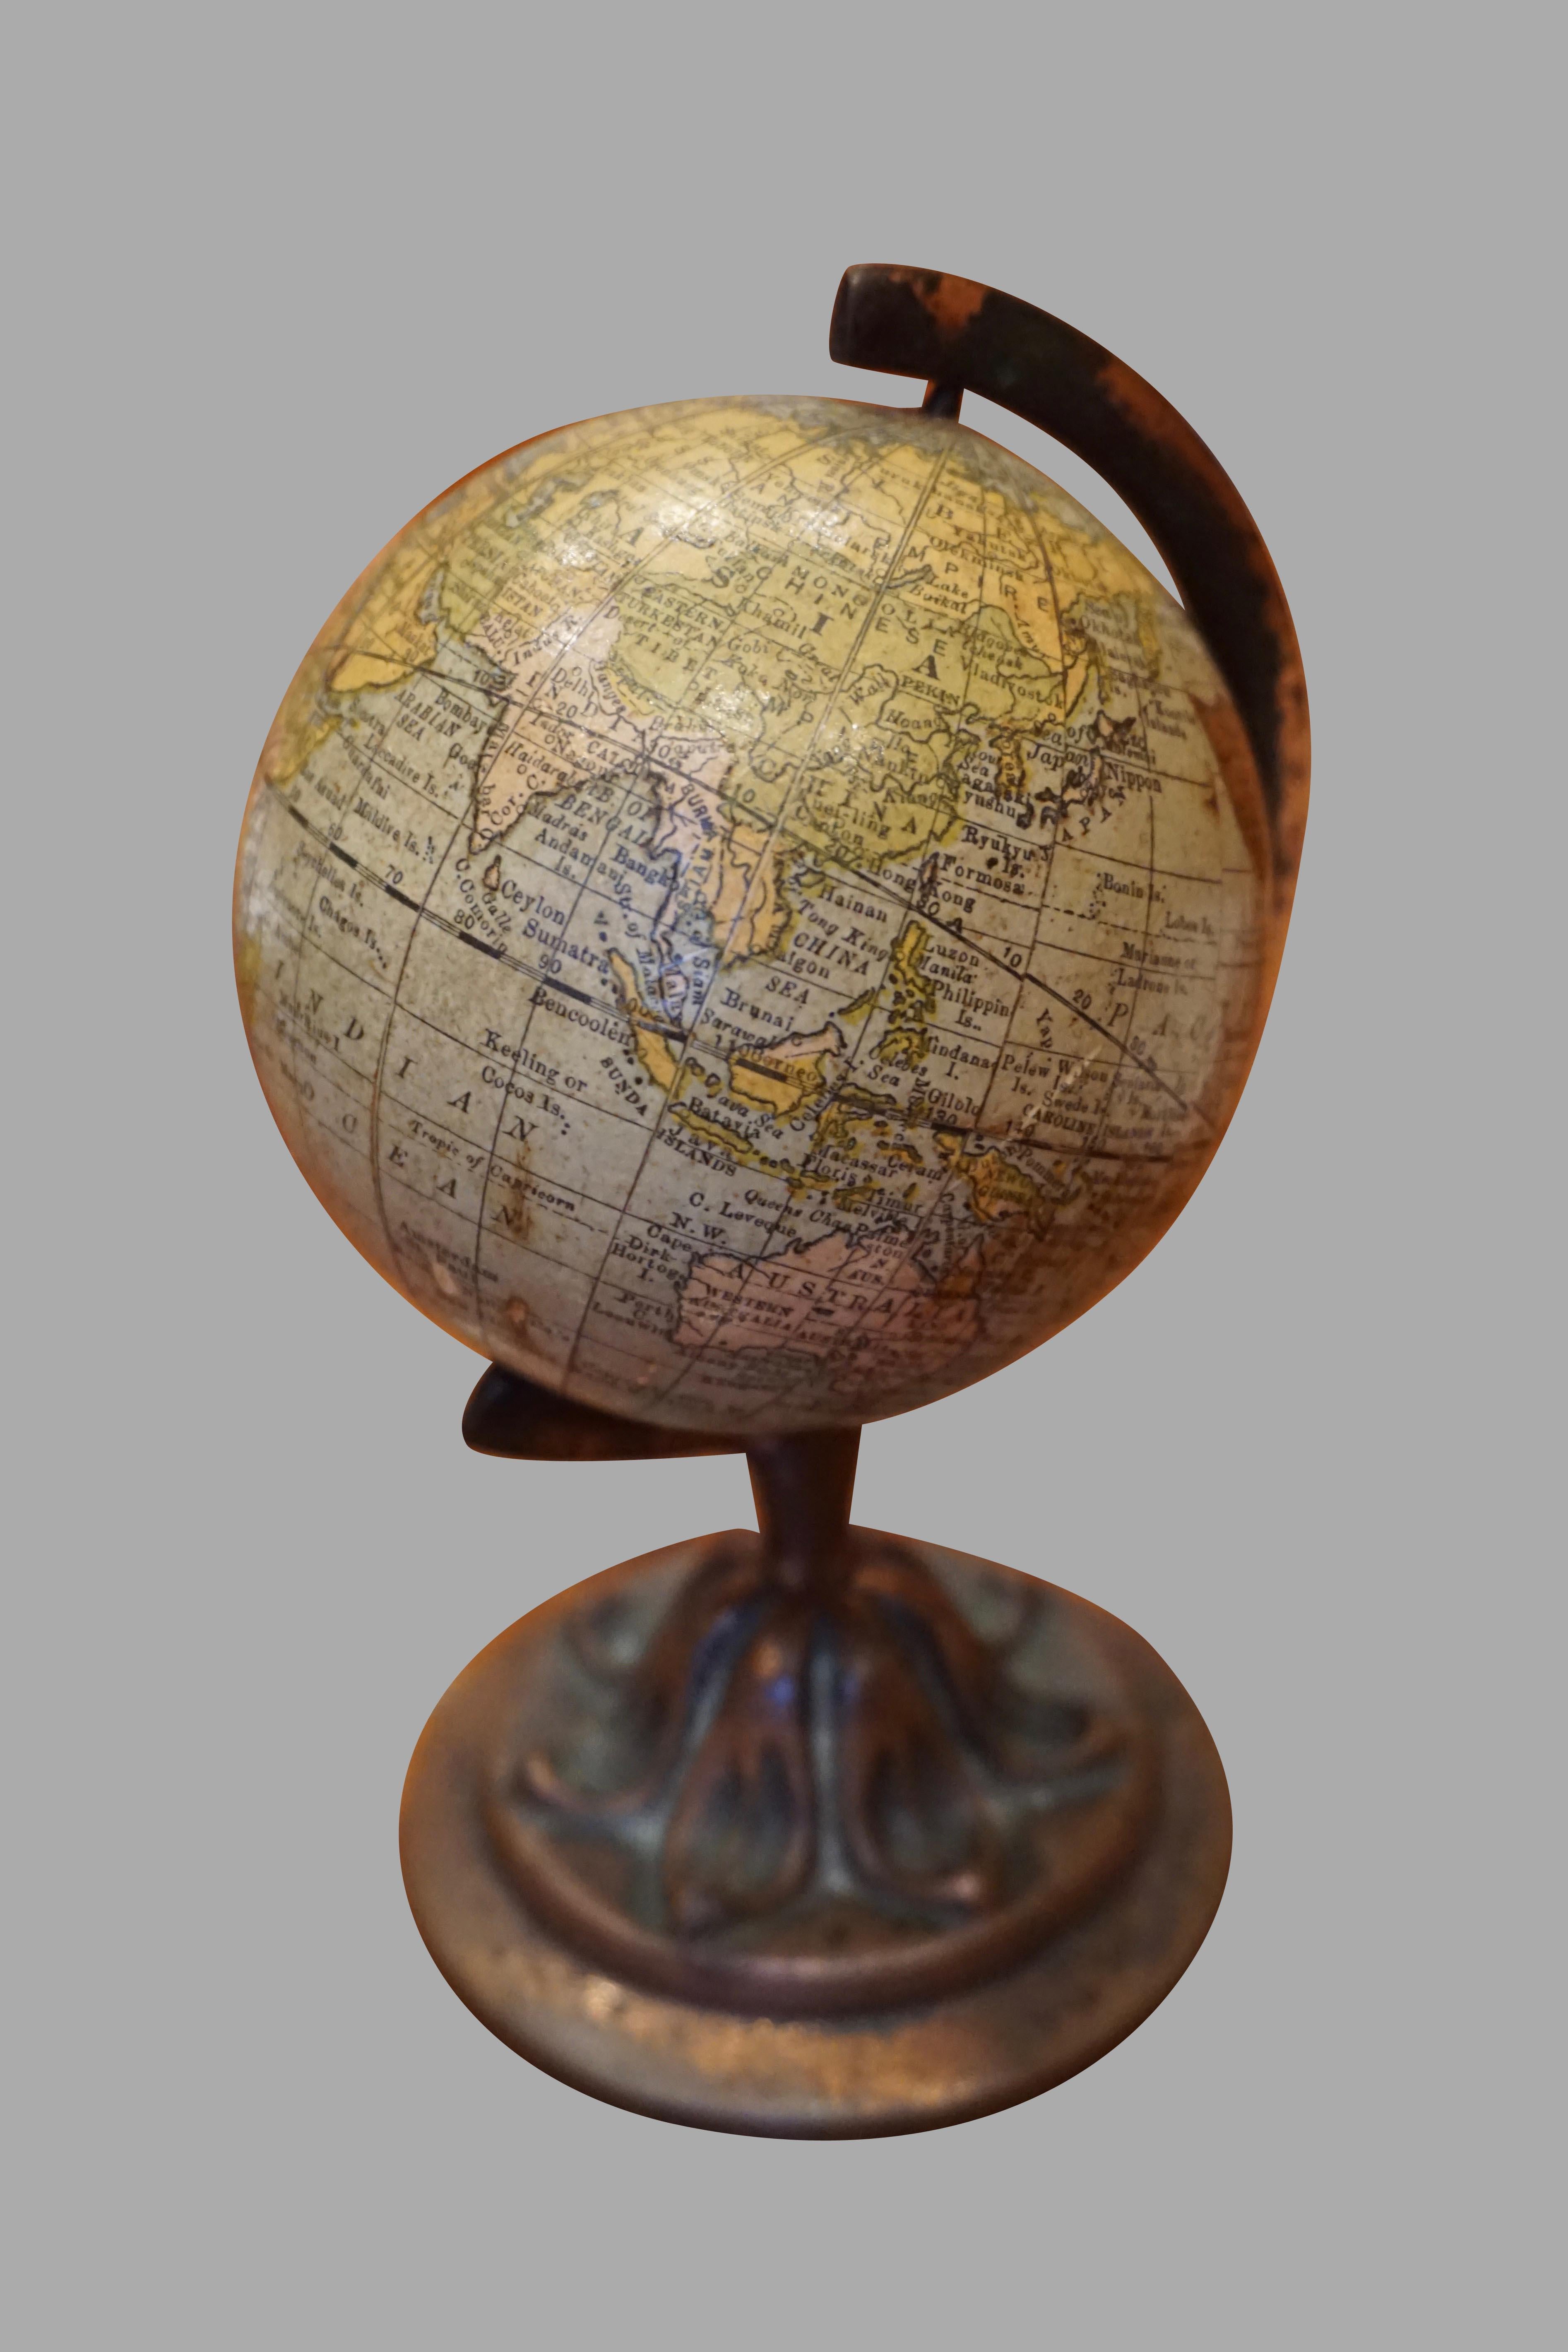 Metal Scarce Terrestrial Globe on Stand by Rand McNally